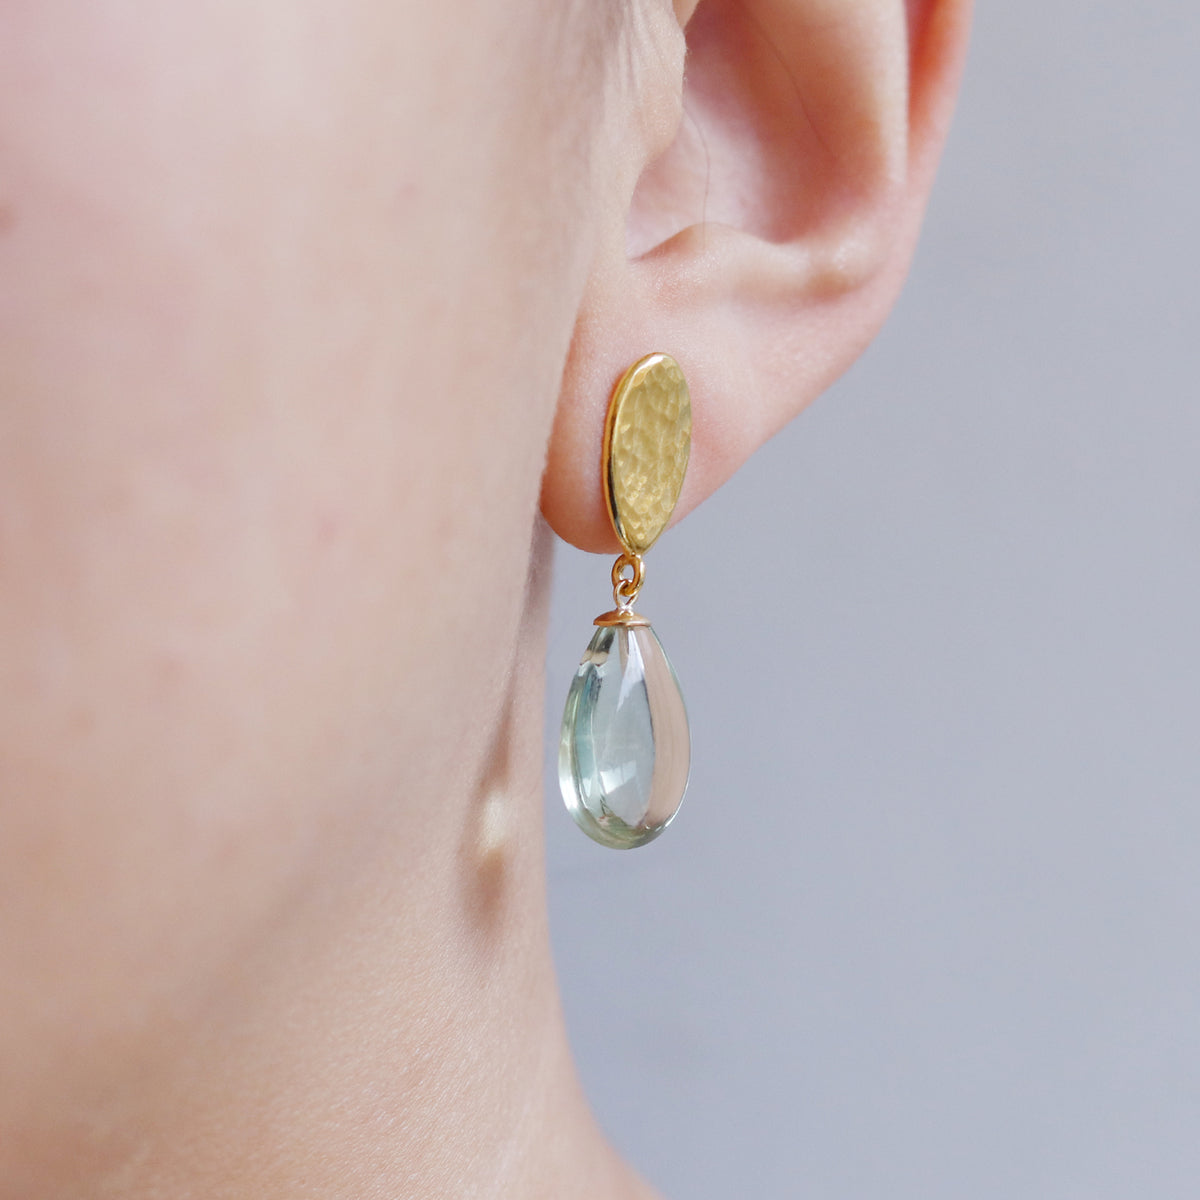 Green Drop Earrings with Gold Hammered Top